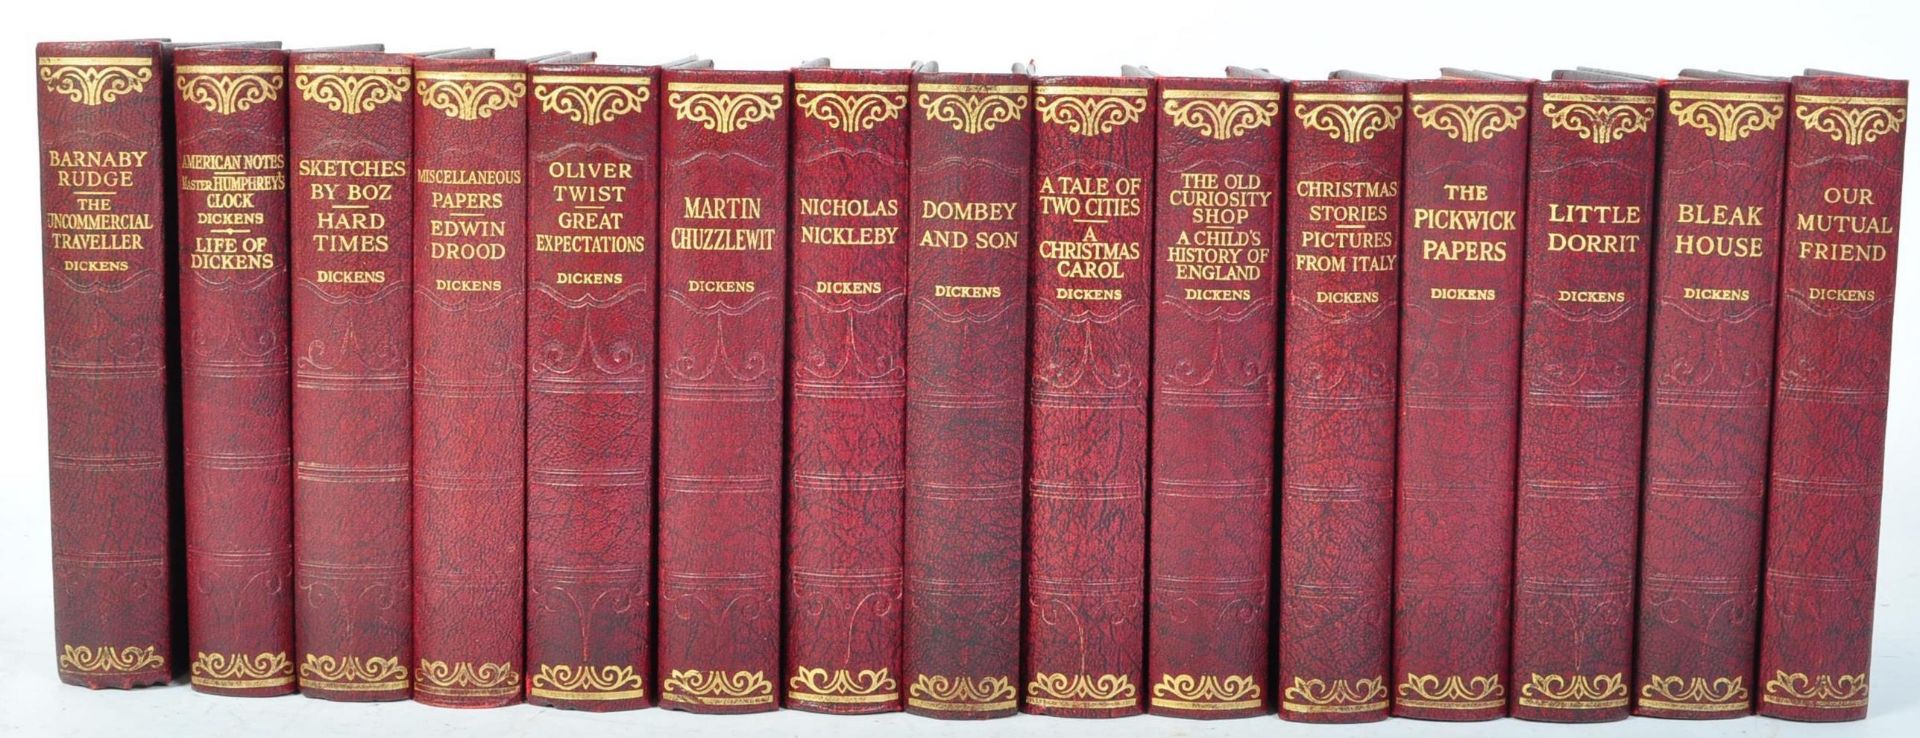 CHARLES DICKENS NOVELS - SIXTEEN VOLUMES - COMPLETE